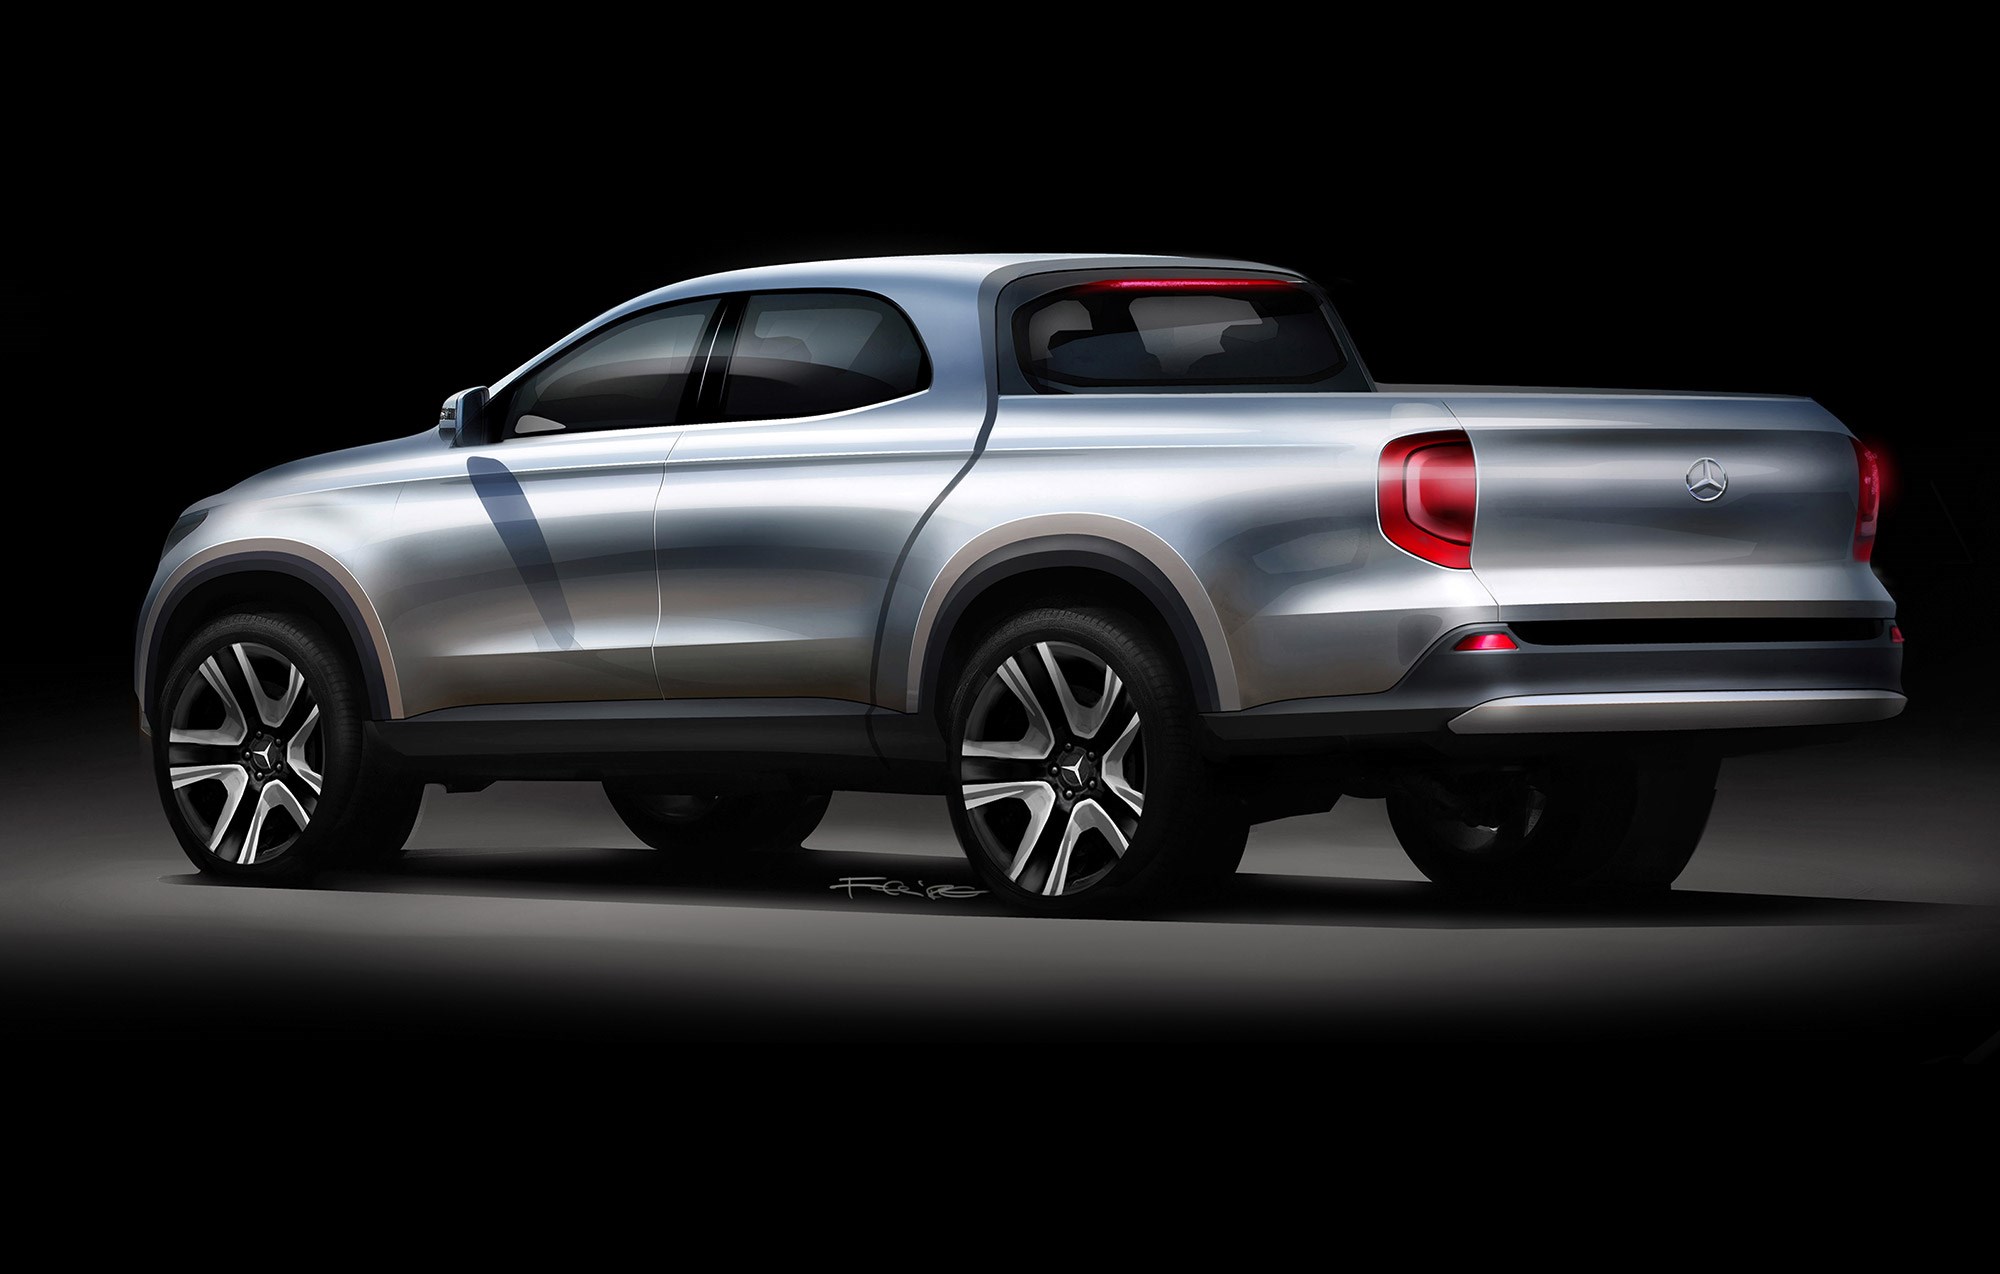 Mercedes GLT: Merc chief on his new pick-up truck developed with Nissan